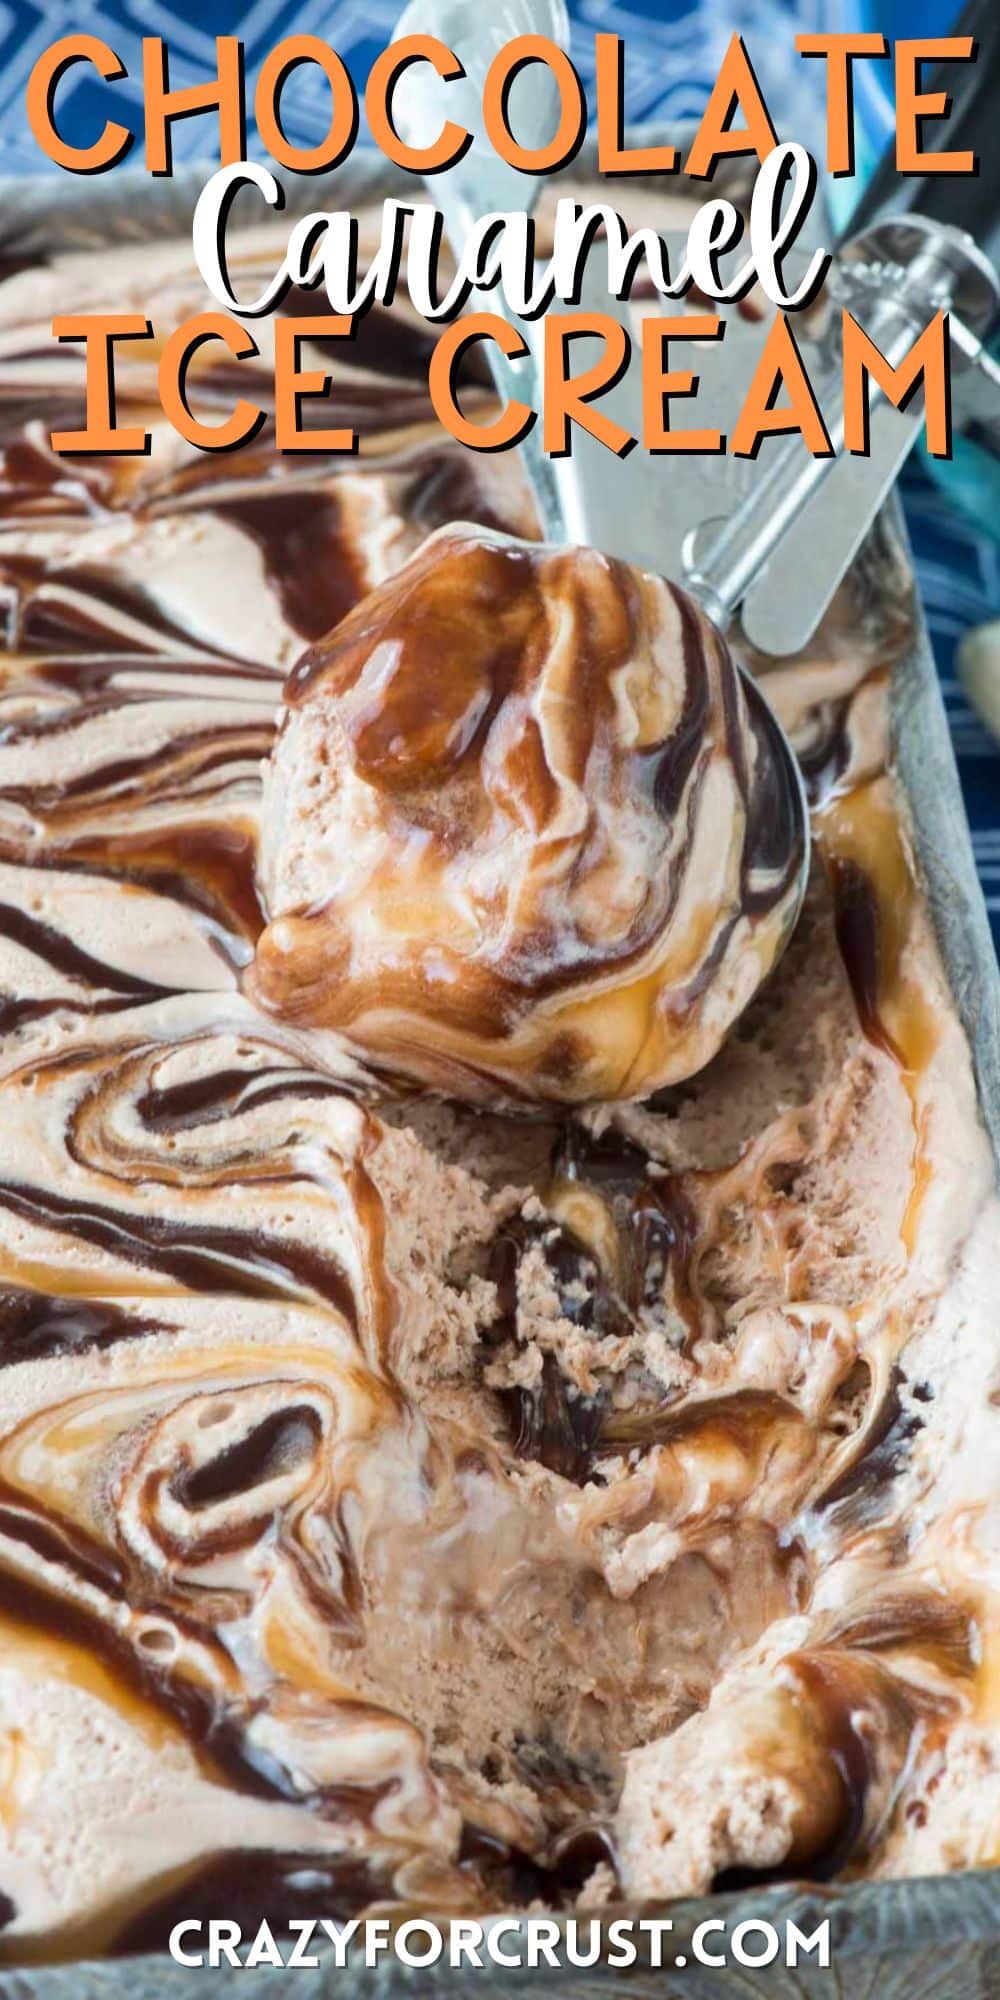 ice cream swirled with chocolate and caramel sauce with words on the image.